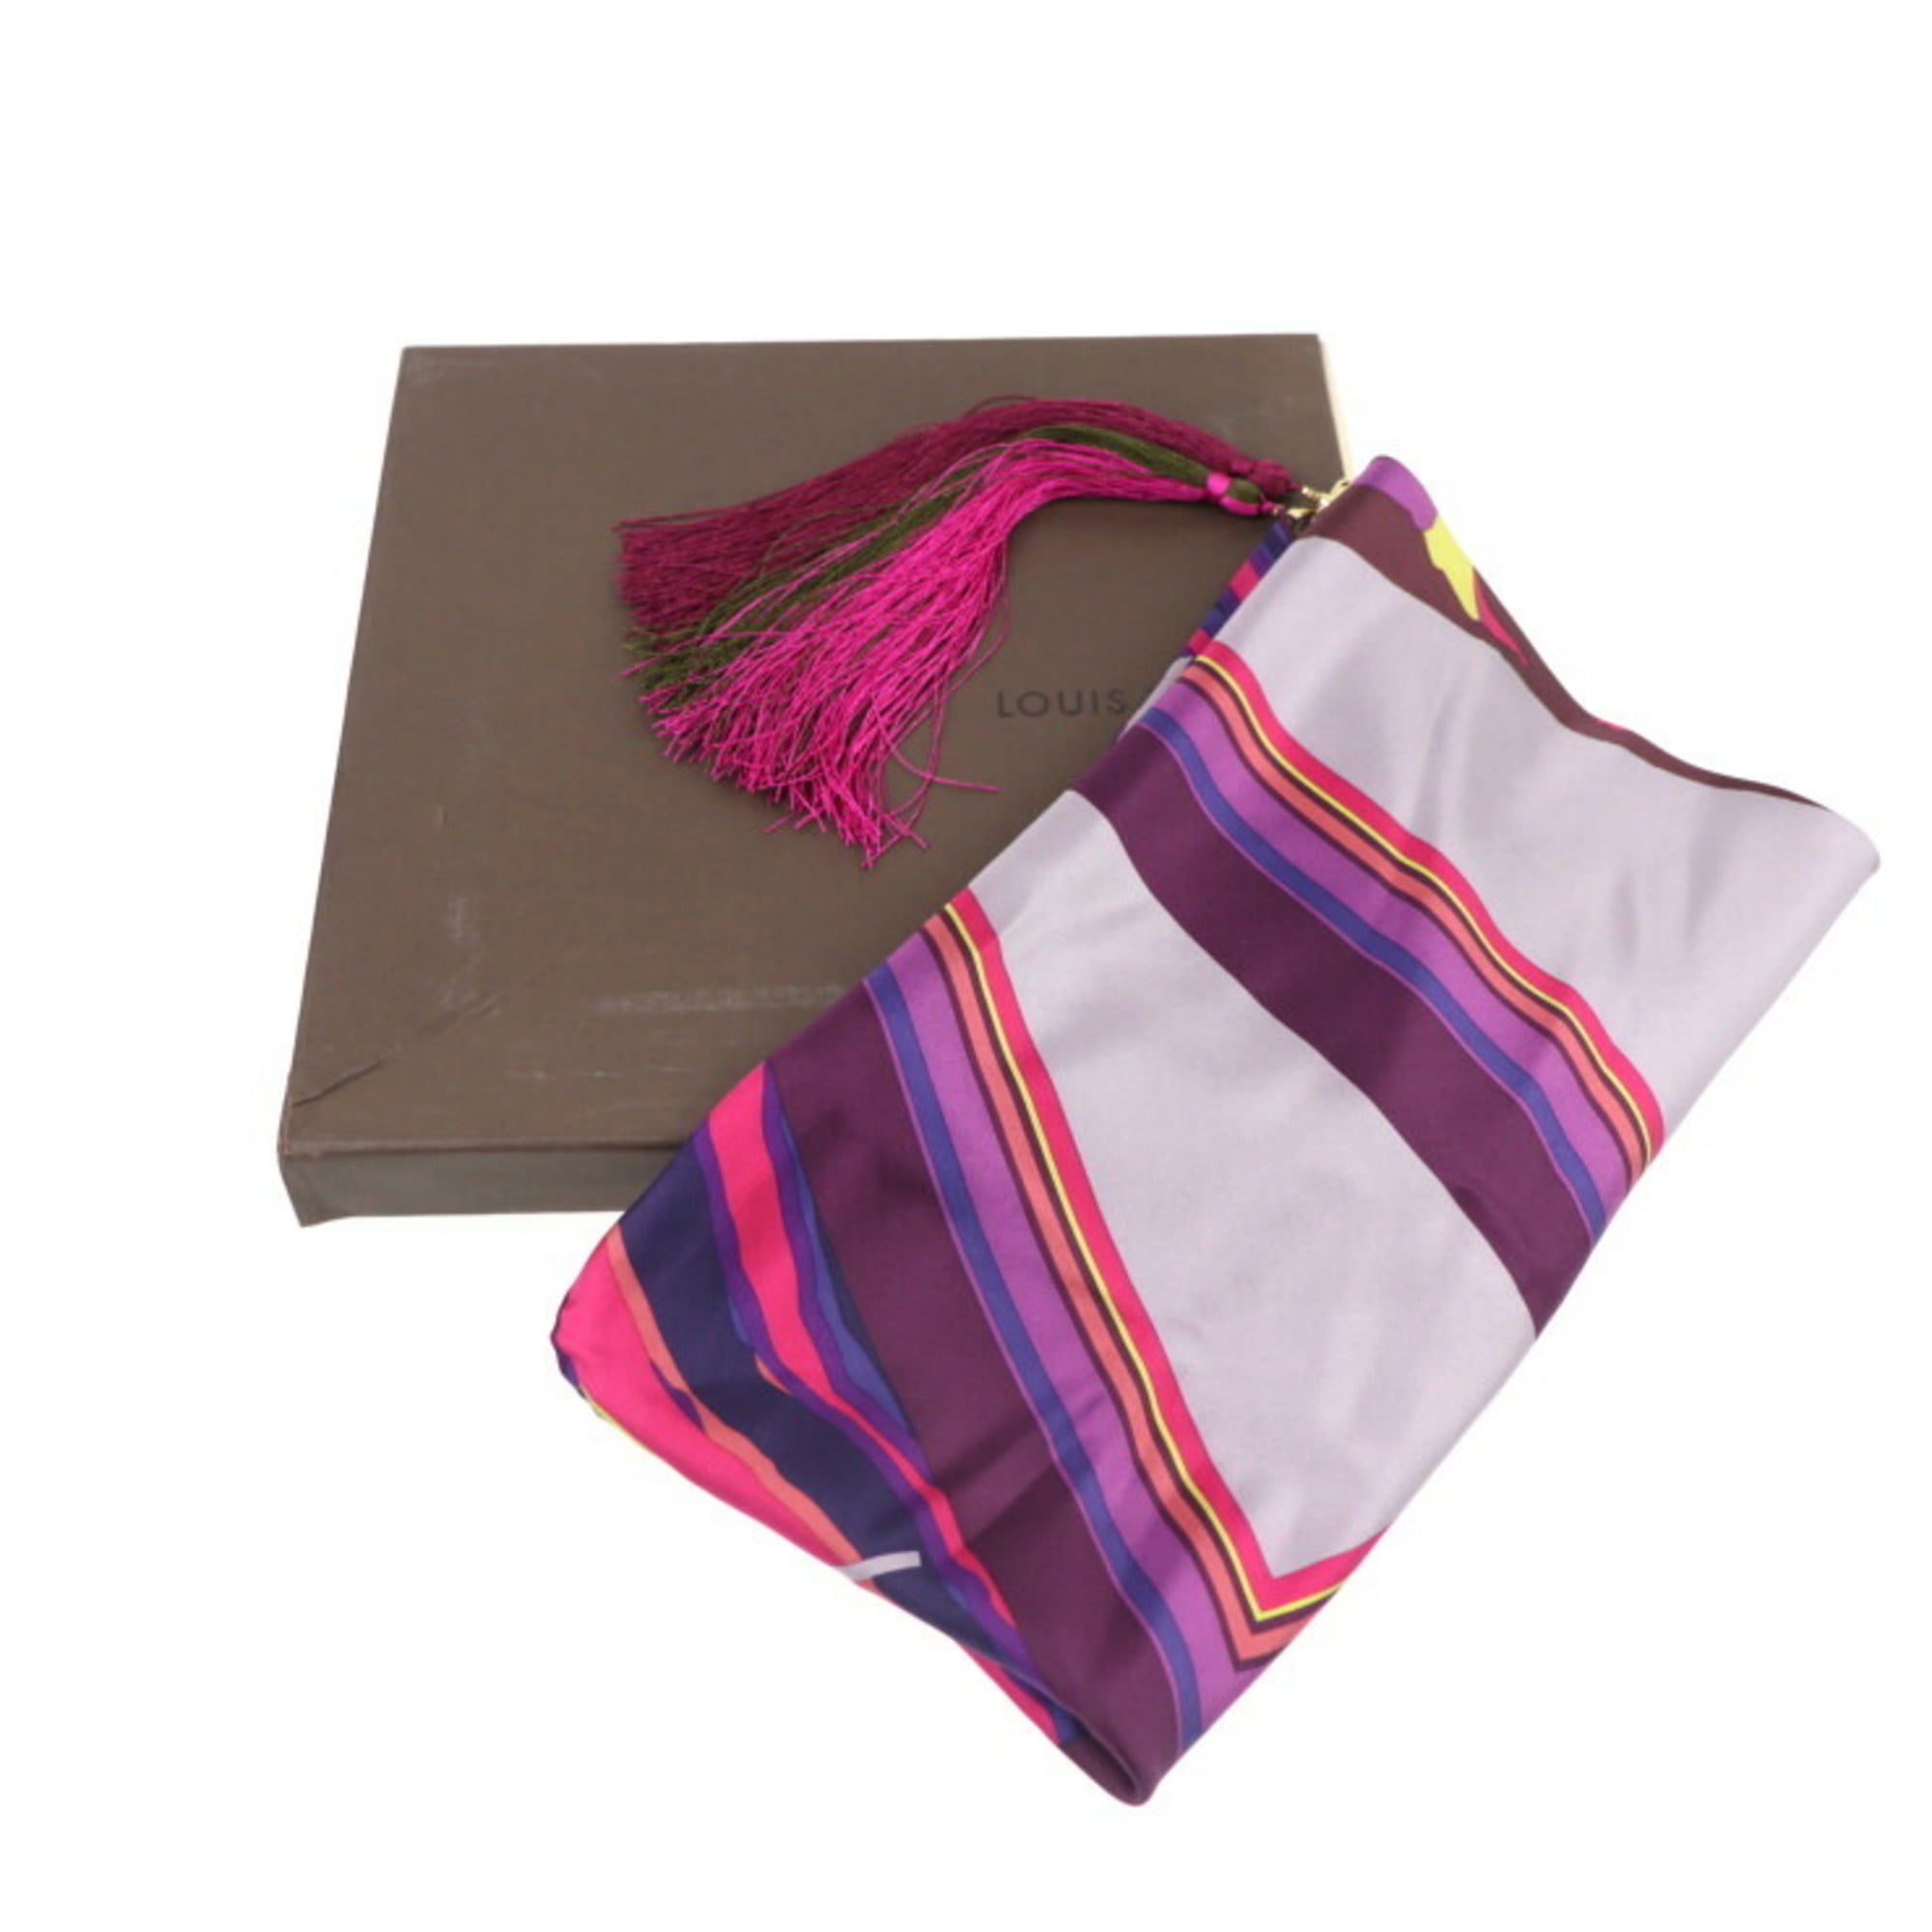 Authenticated Used LOUIS VUITTON Louis Vuitton fringed scarf silk purple  multicolor 400505 apparel accessories 